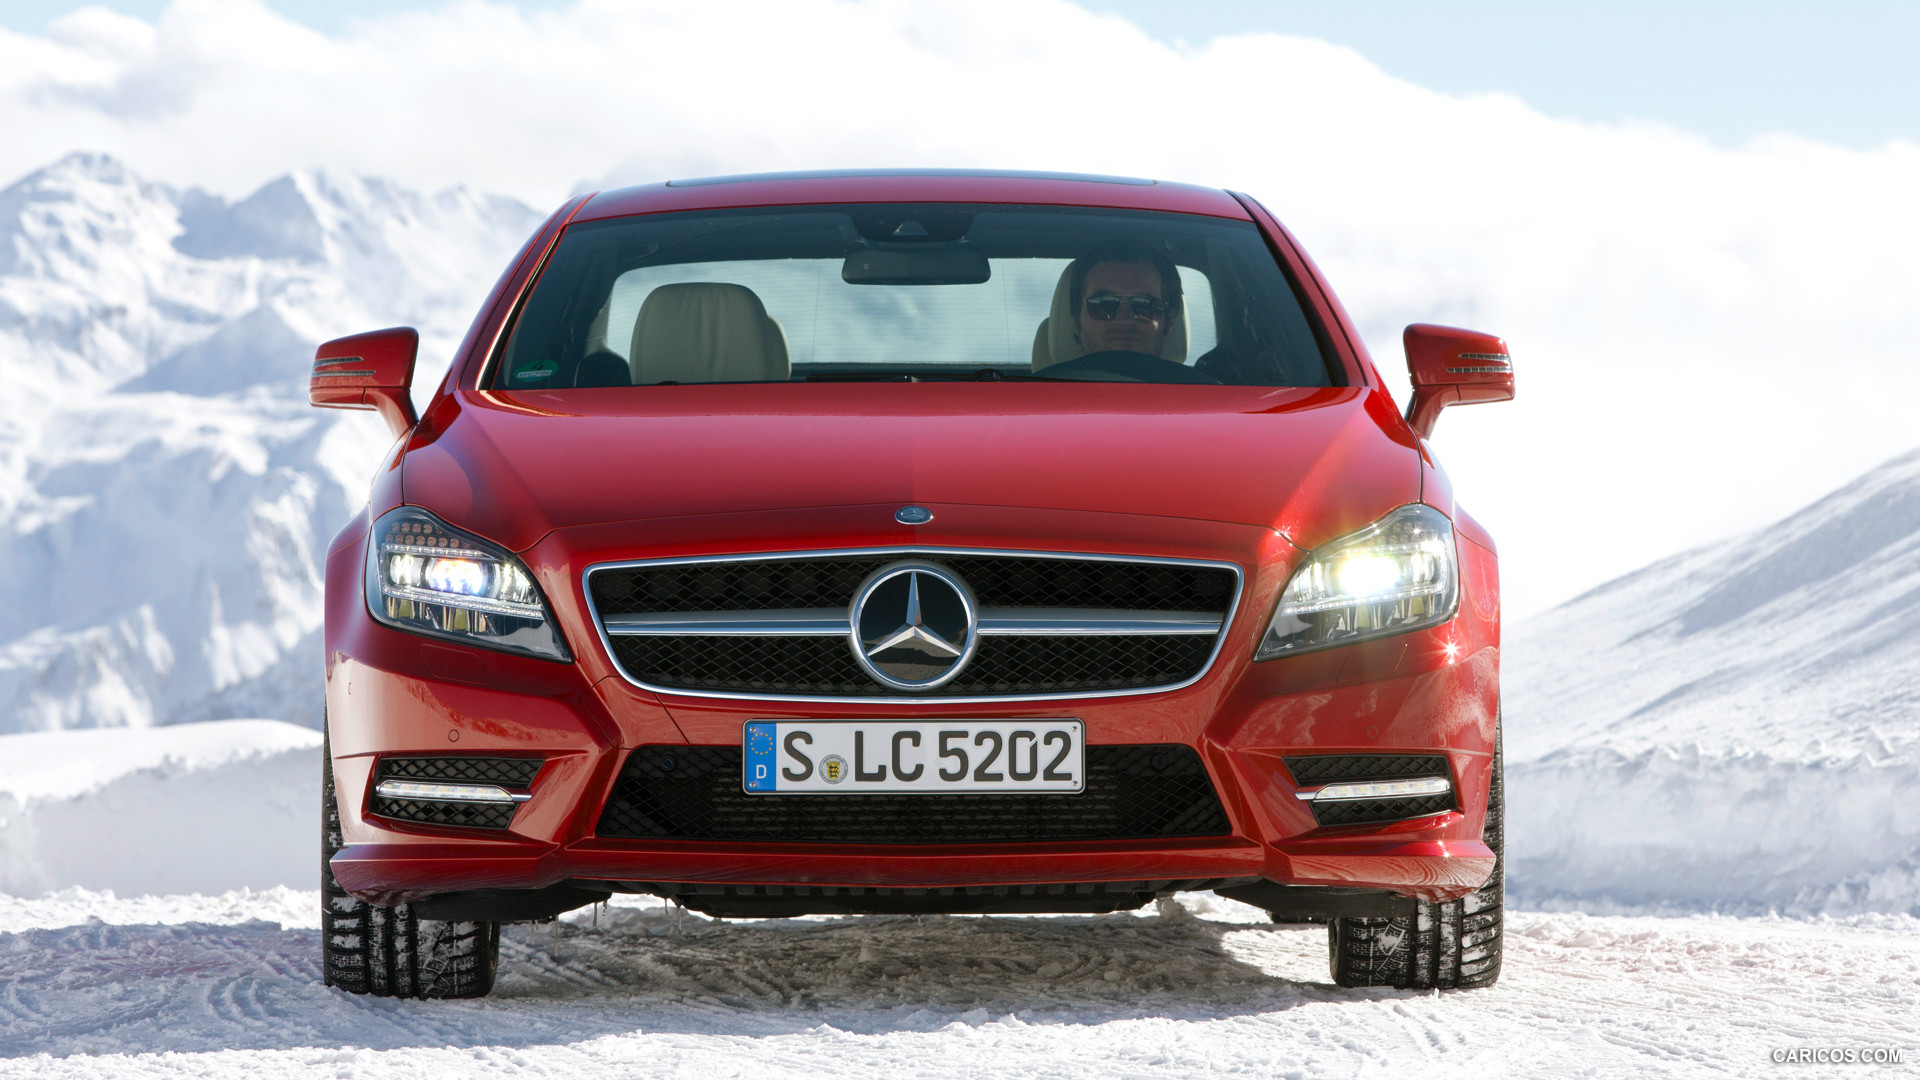 Mercedes-Benz CLS350 CDI 4MATIC (2012)  - Front Angle , #2 of 15